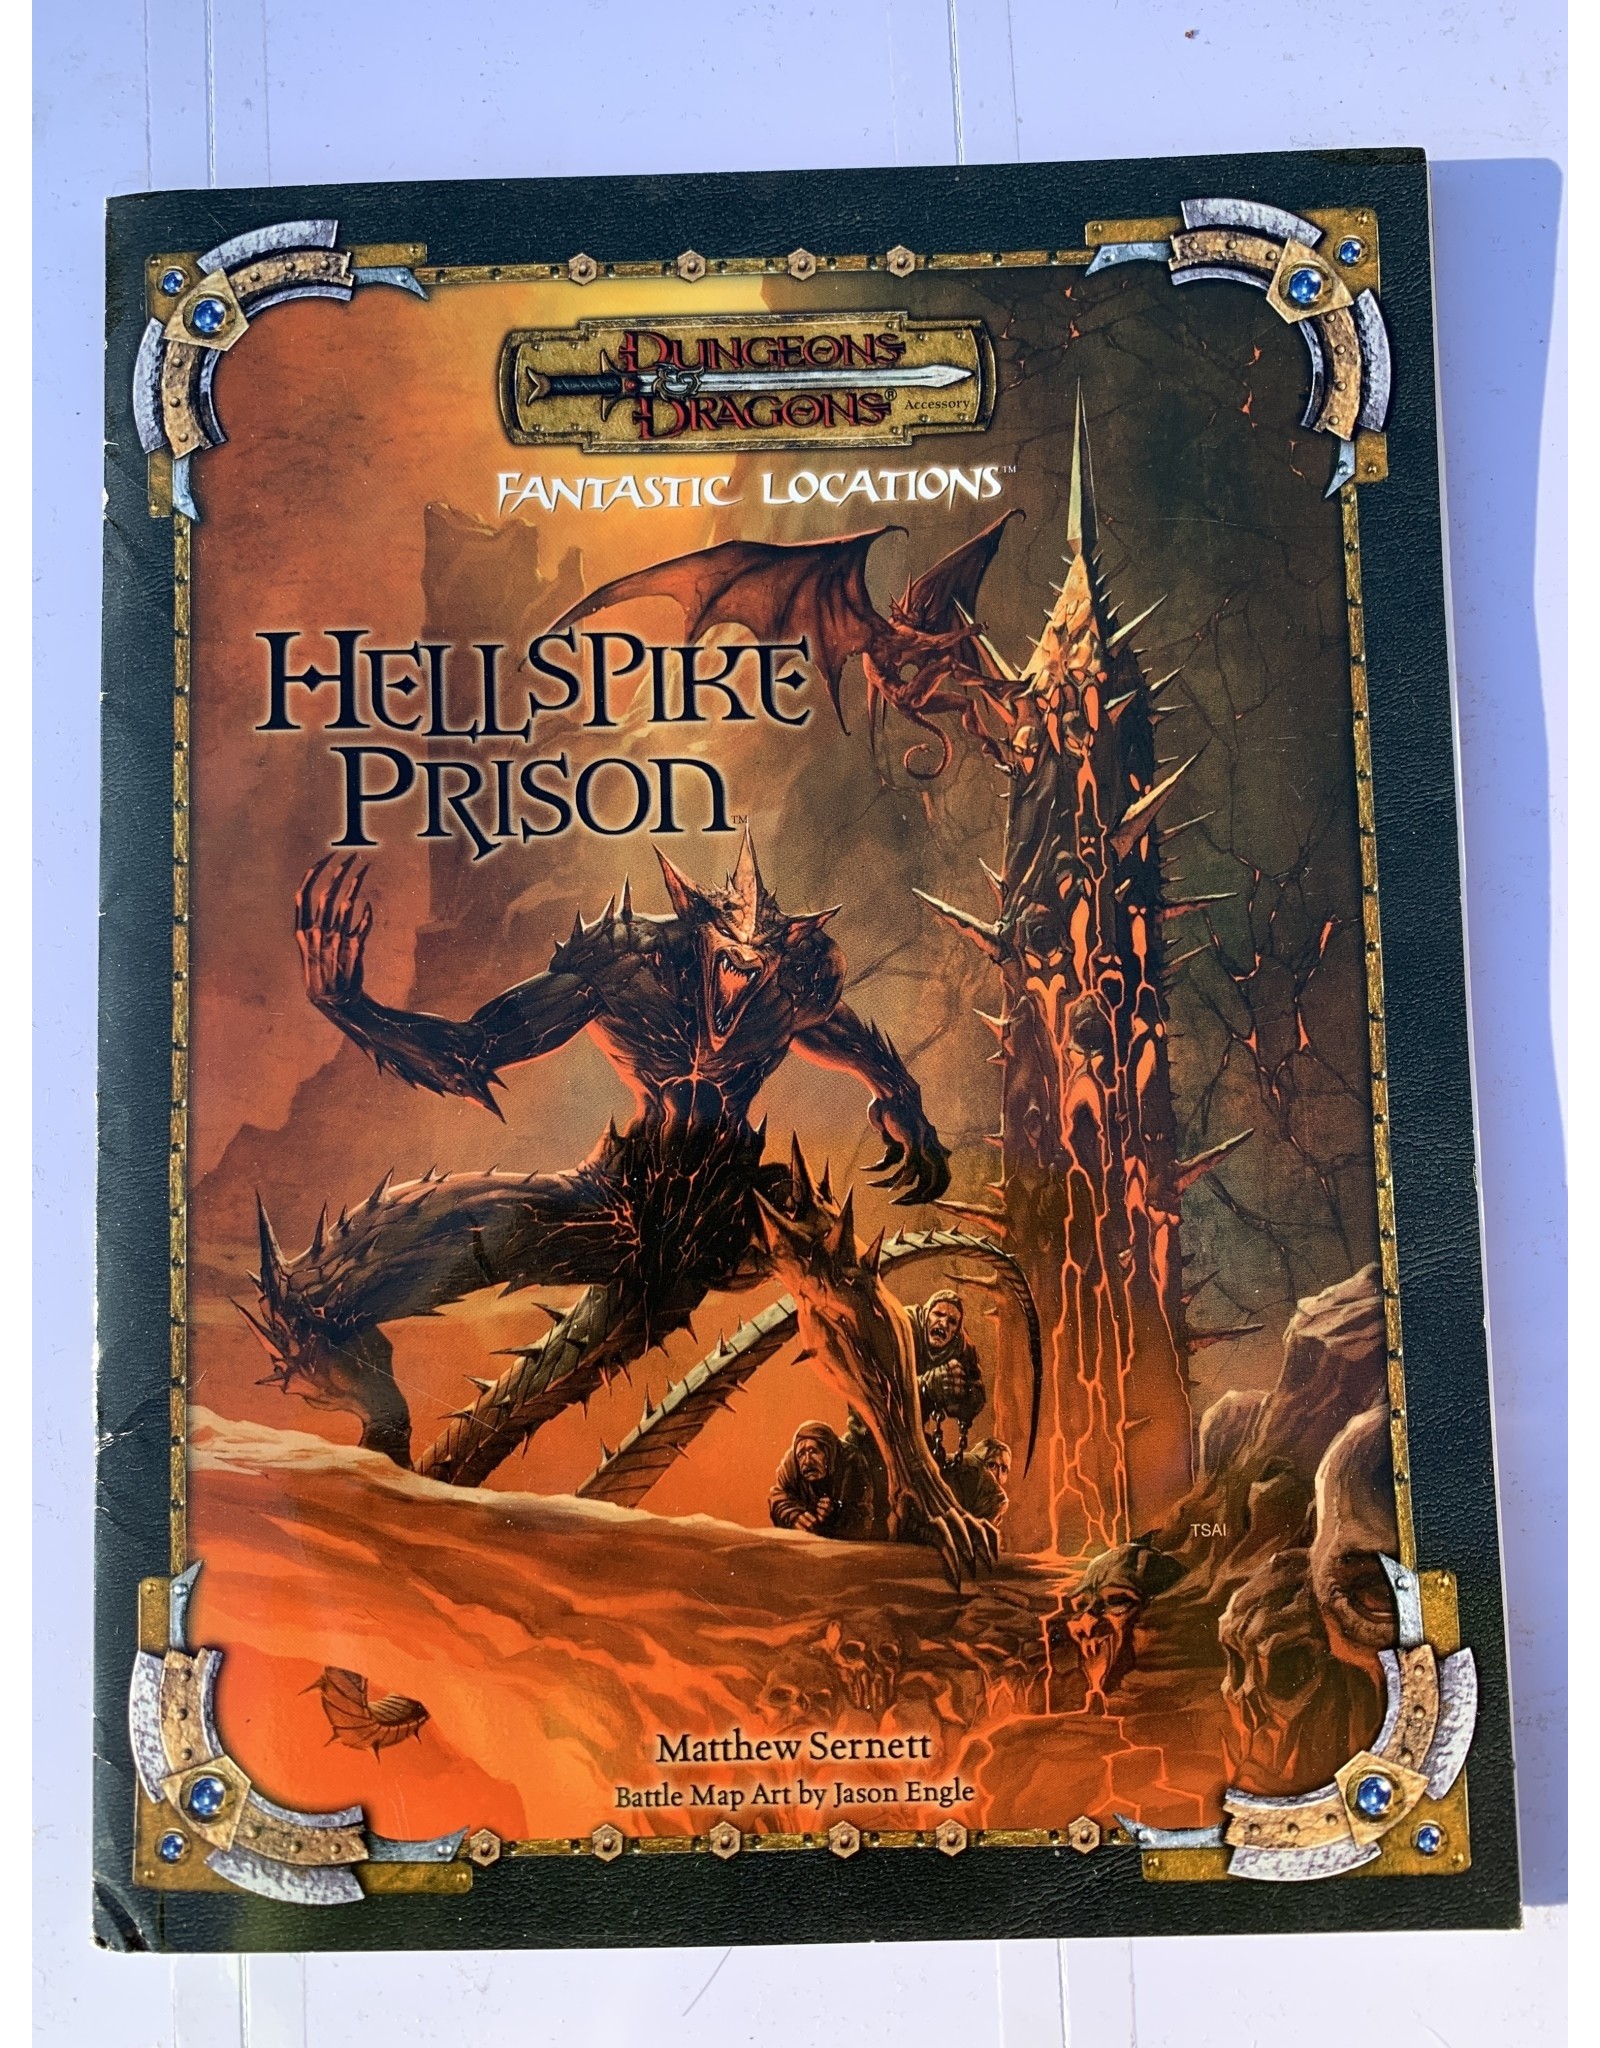 Wizards of the Coast Dungeons & Dragons (3.5 Edition) - Hellspike Prison (2005)